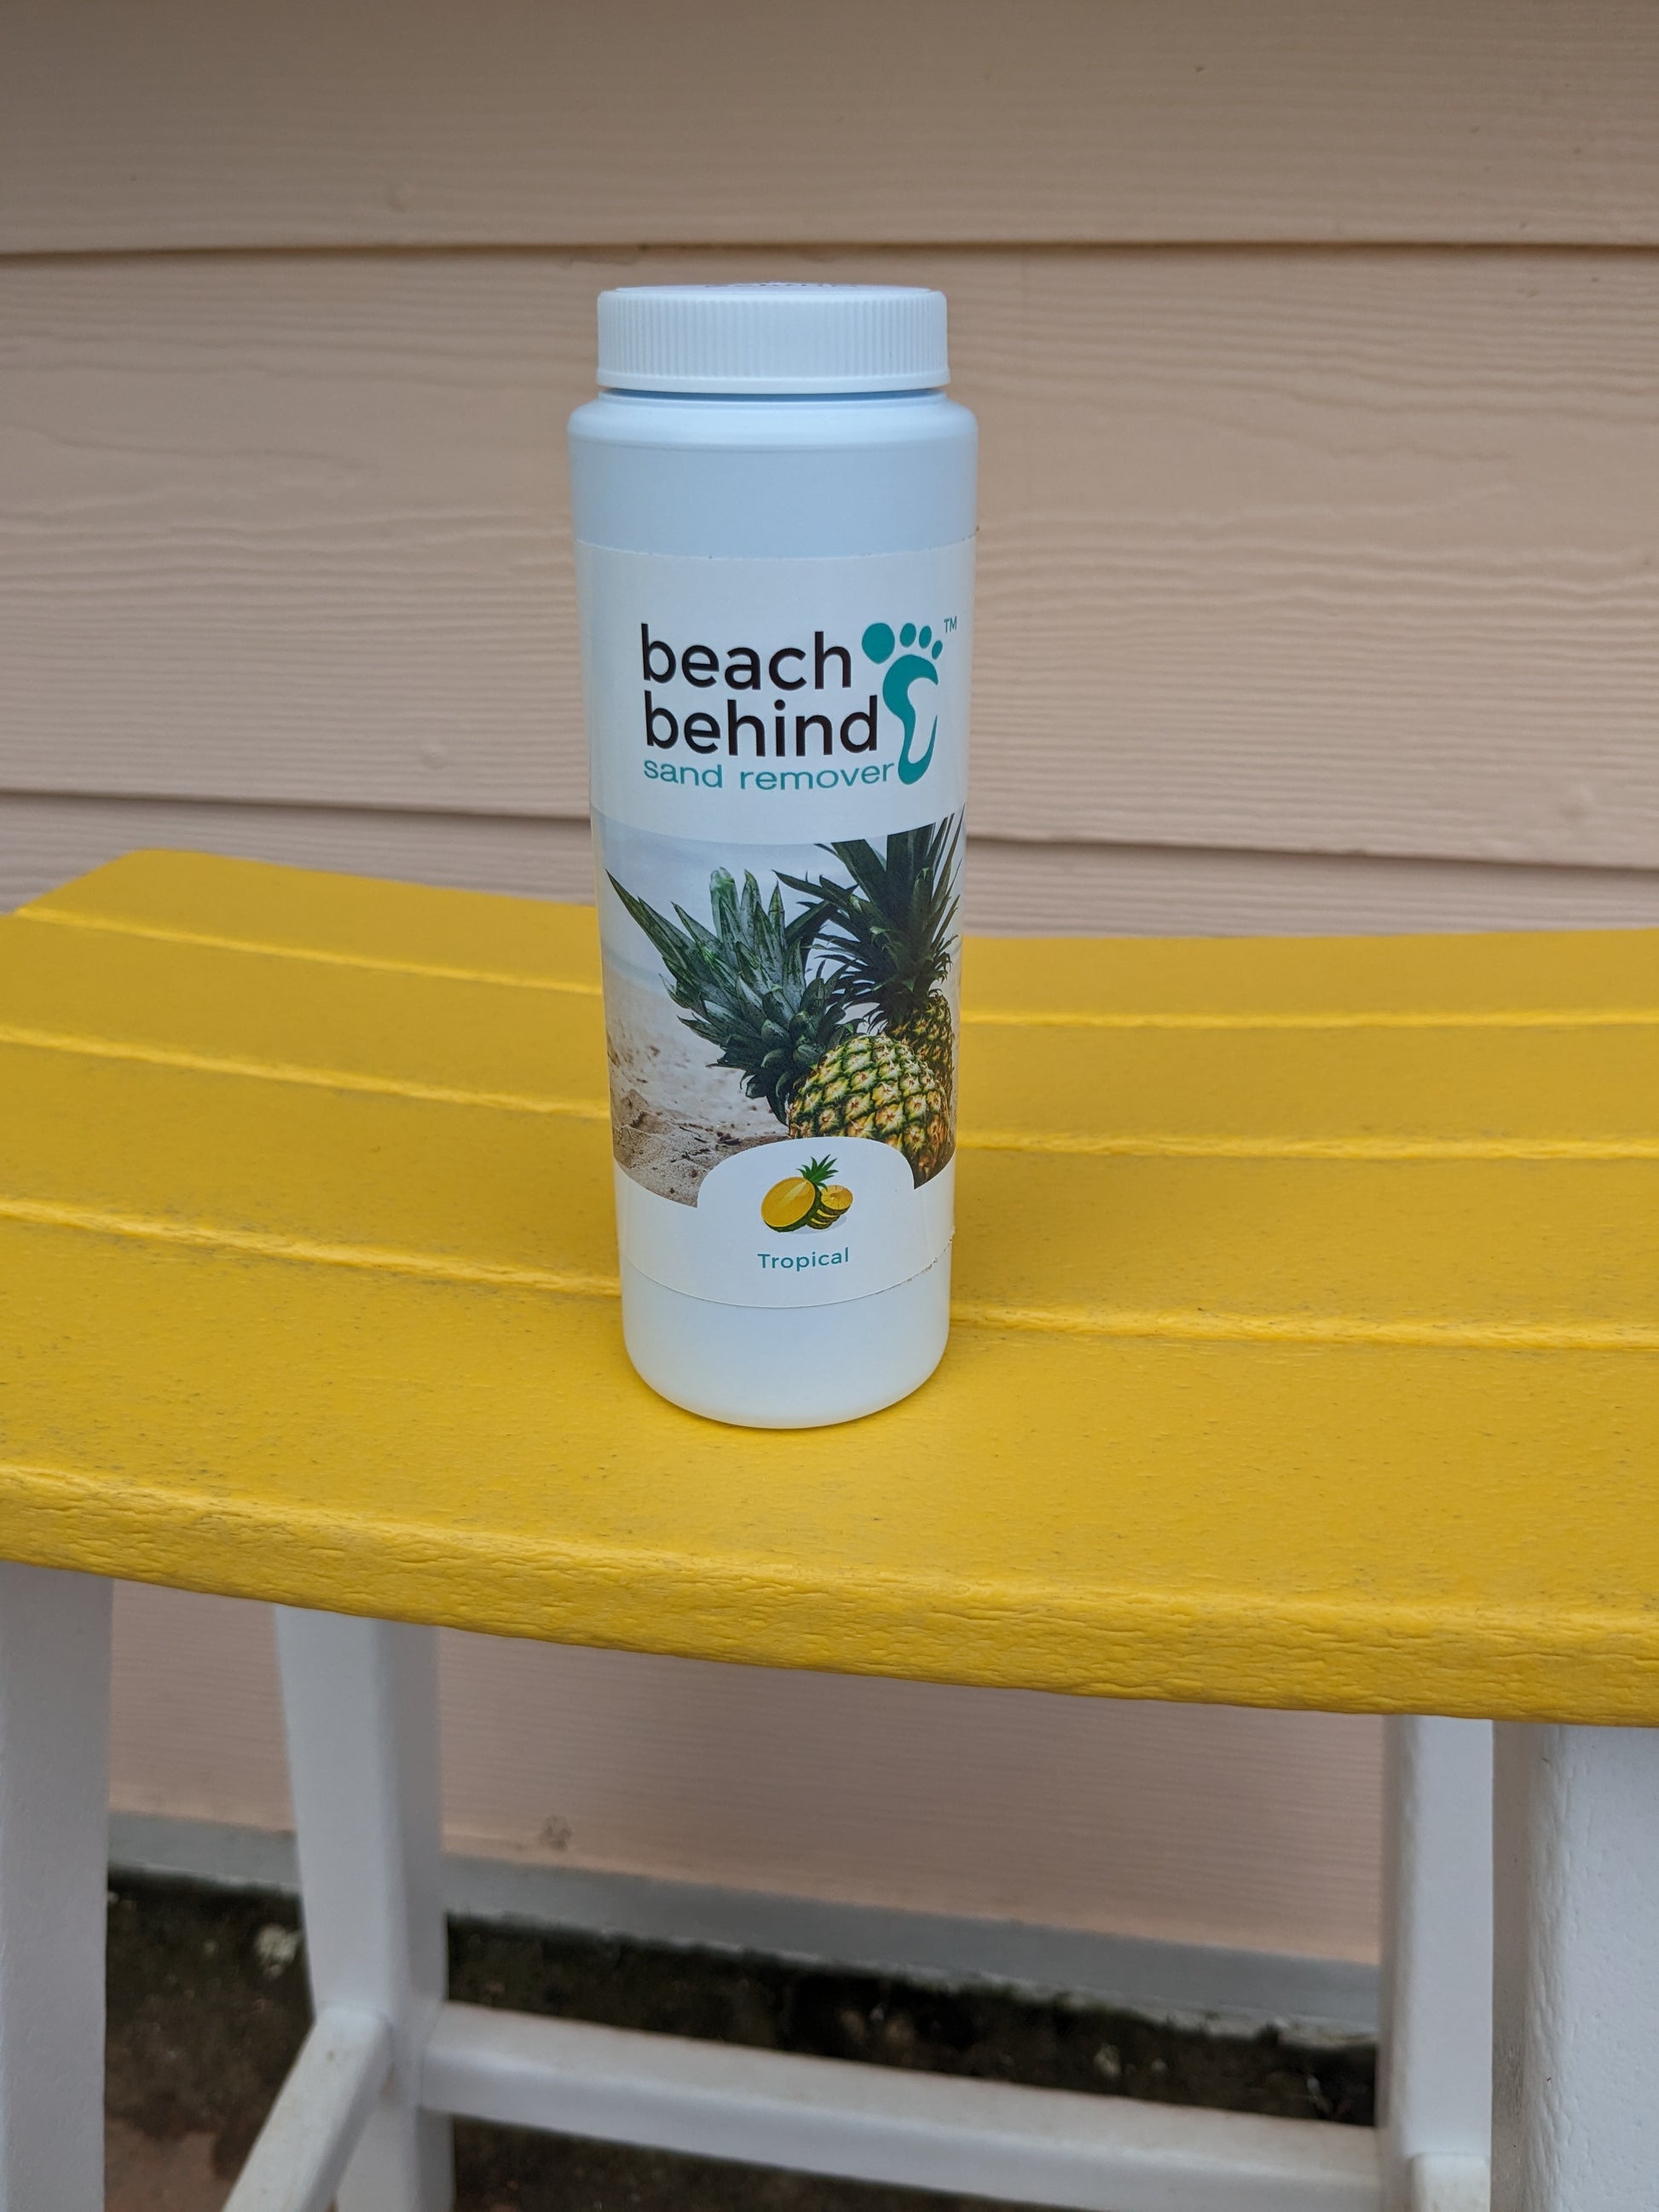 yellow beach chair with tropical scent beach sand remover